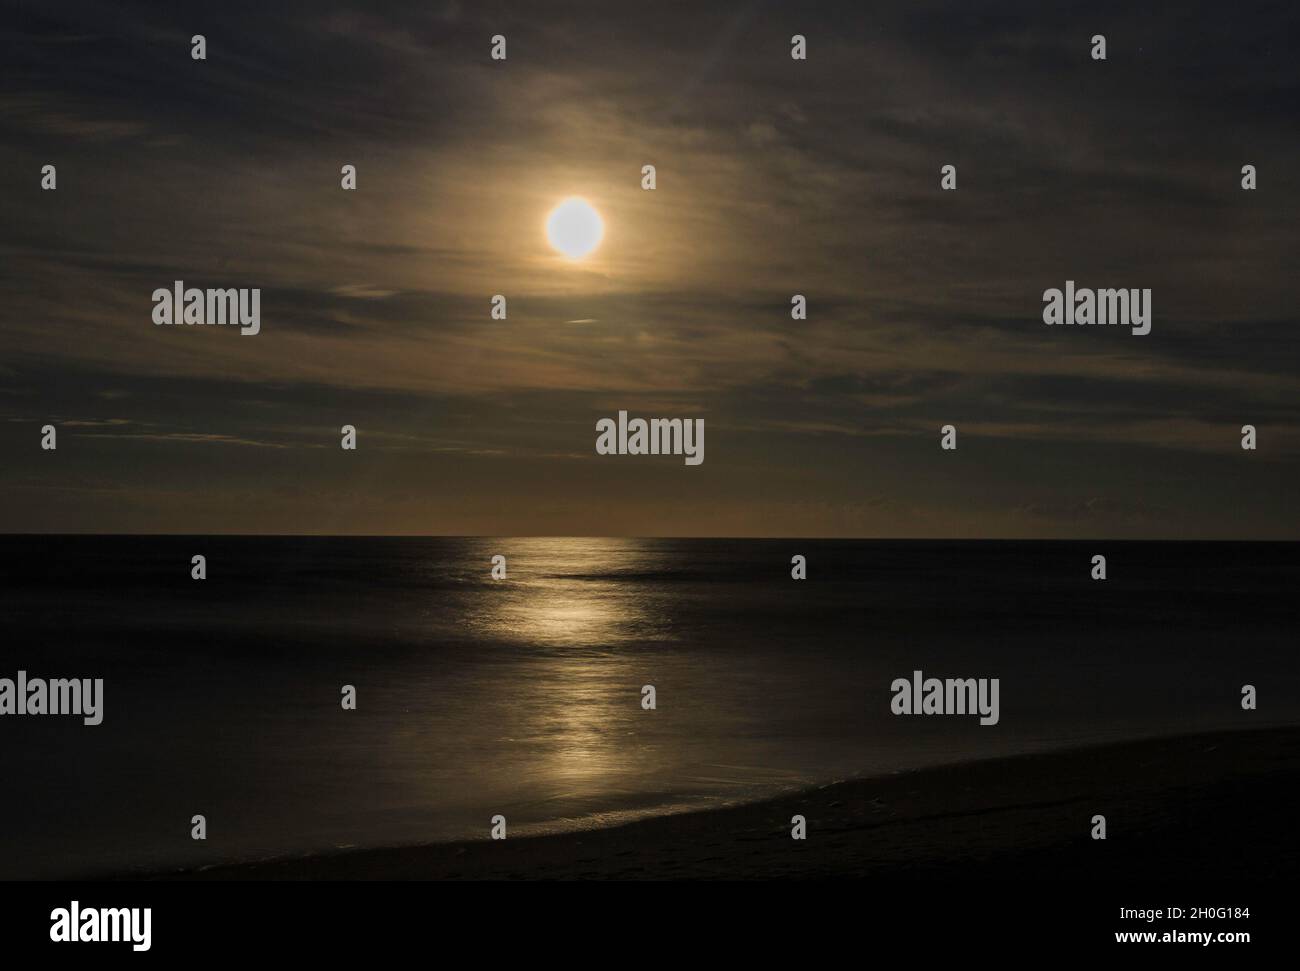 Long exposure, night beach scene with large full moon and clouds sitting over a calm, smooth sea and surf. Stock Photo